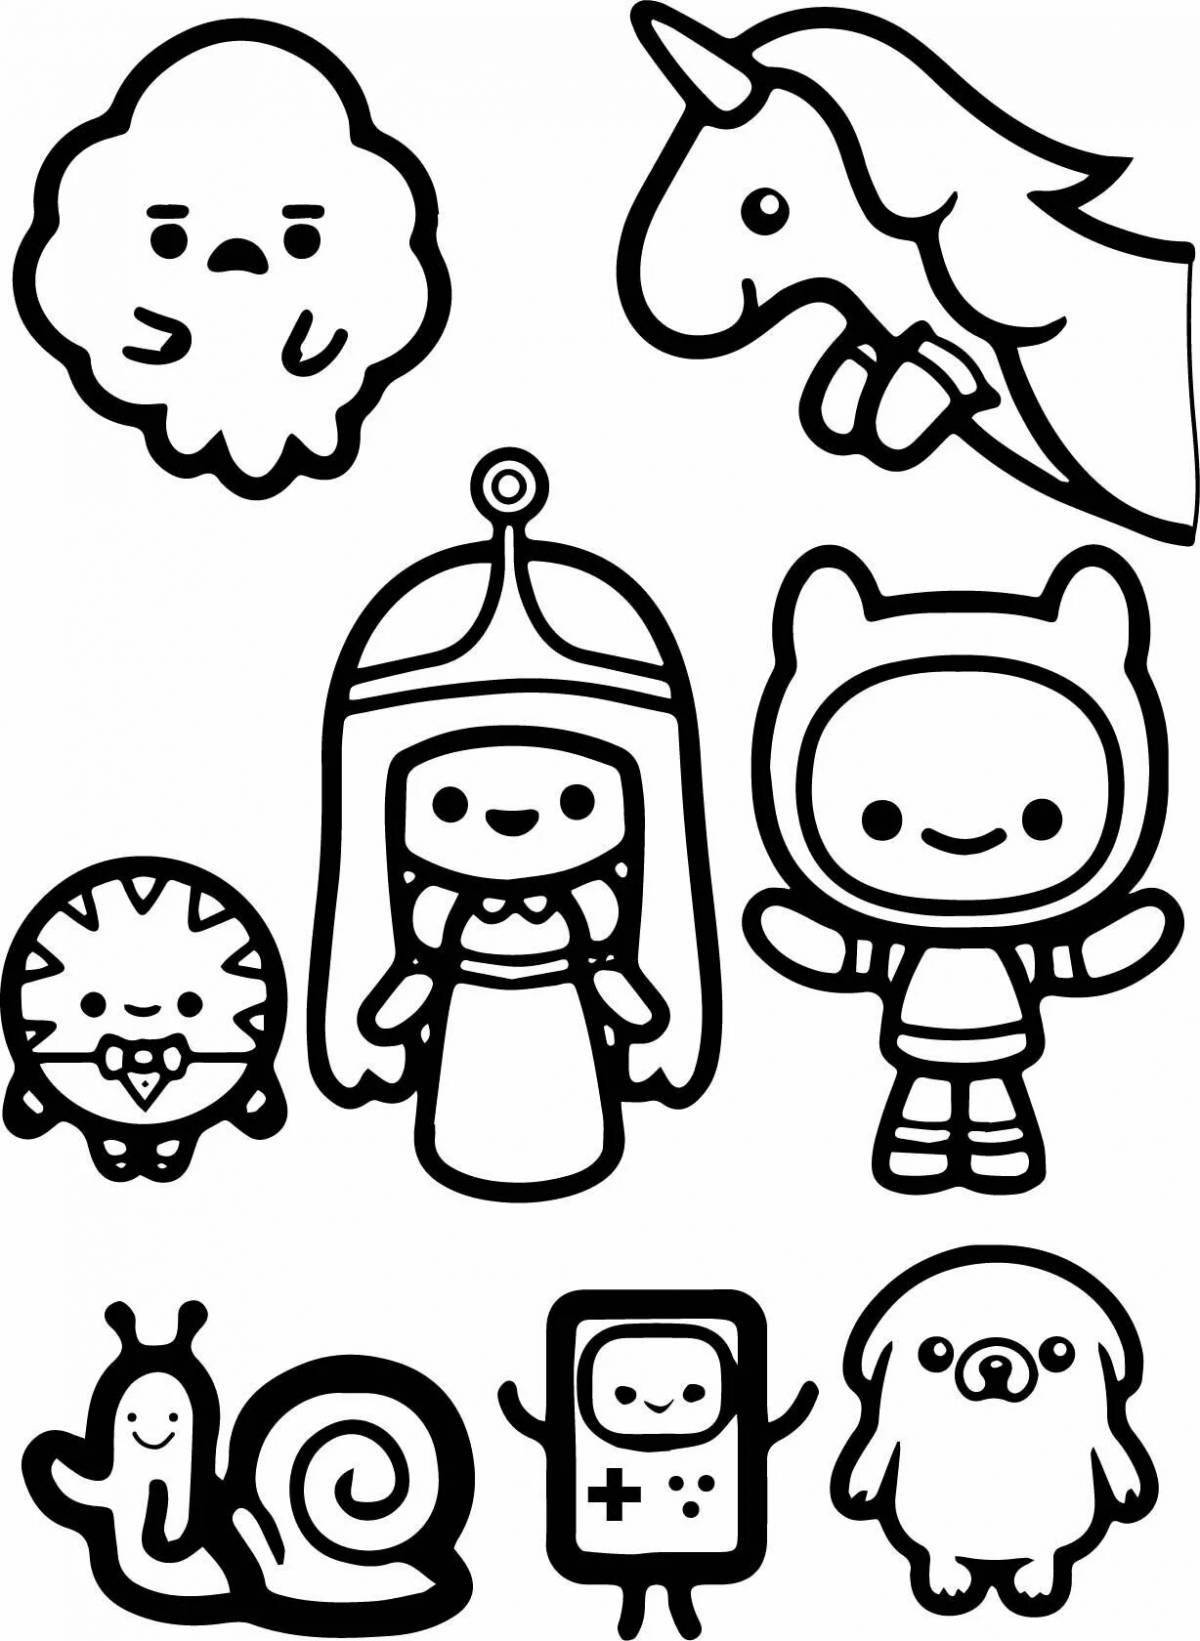 Colorful coloring pages for stickers